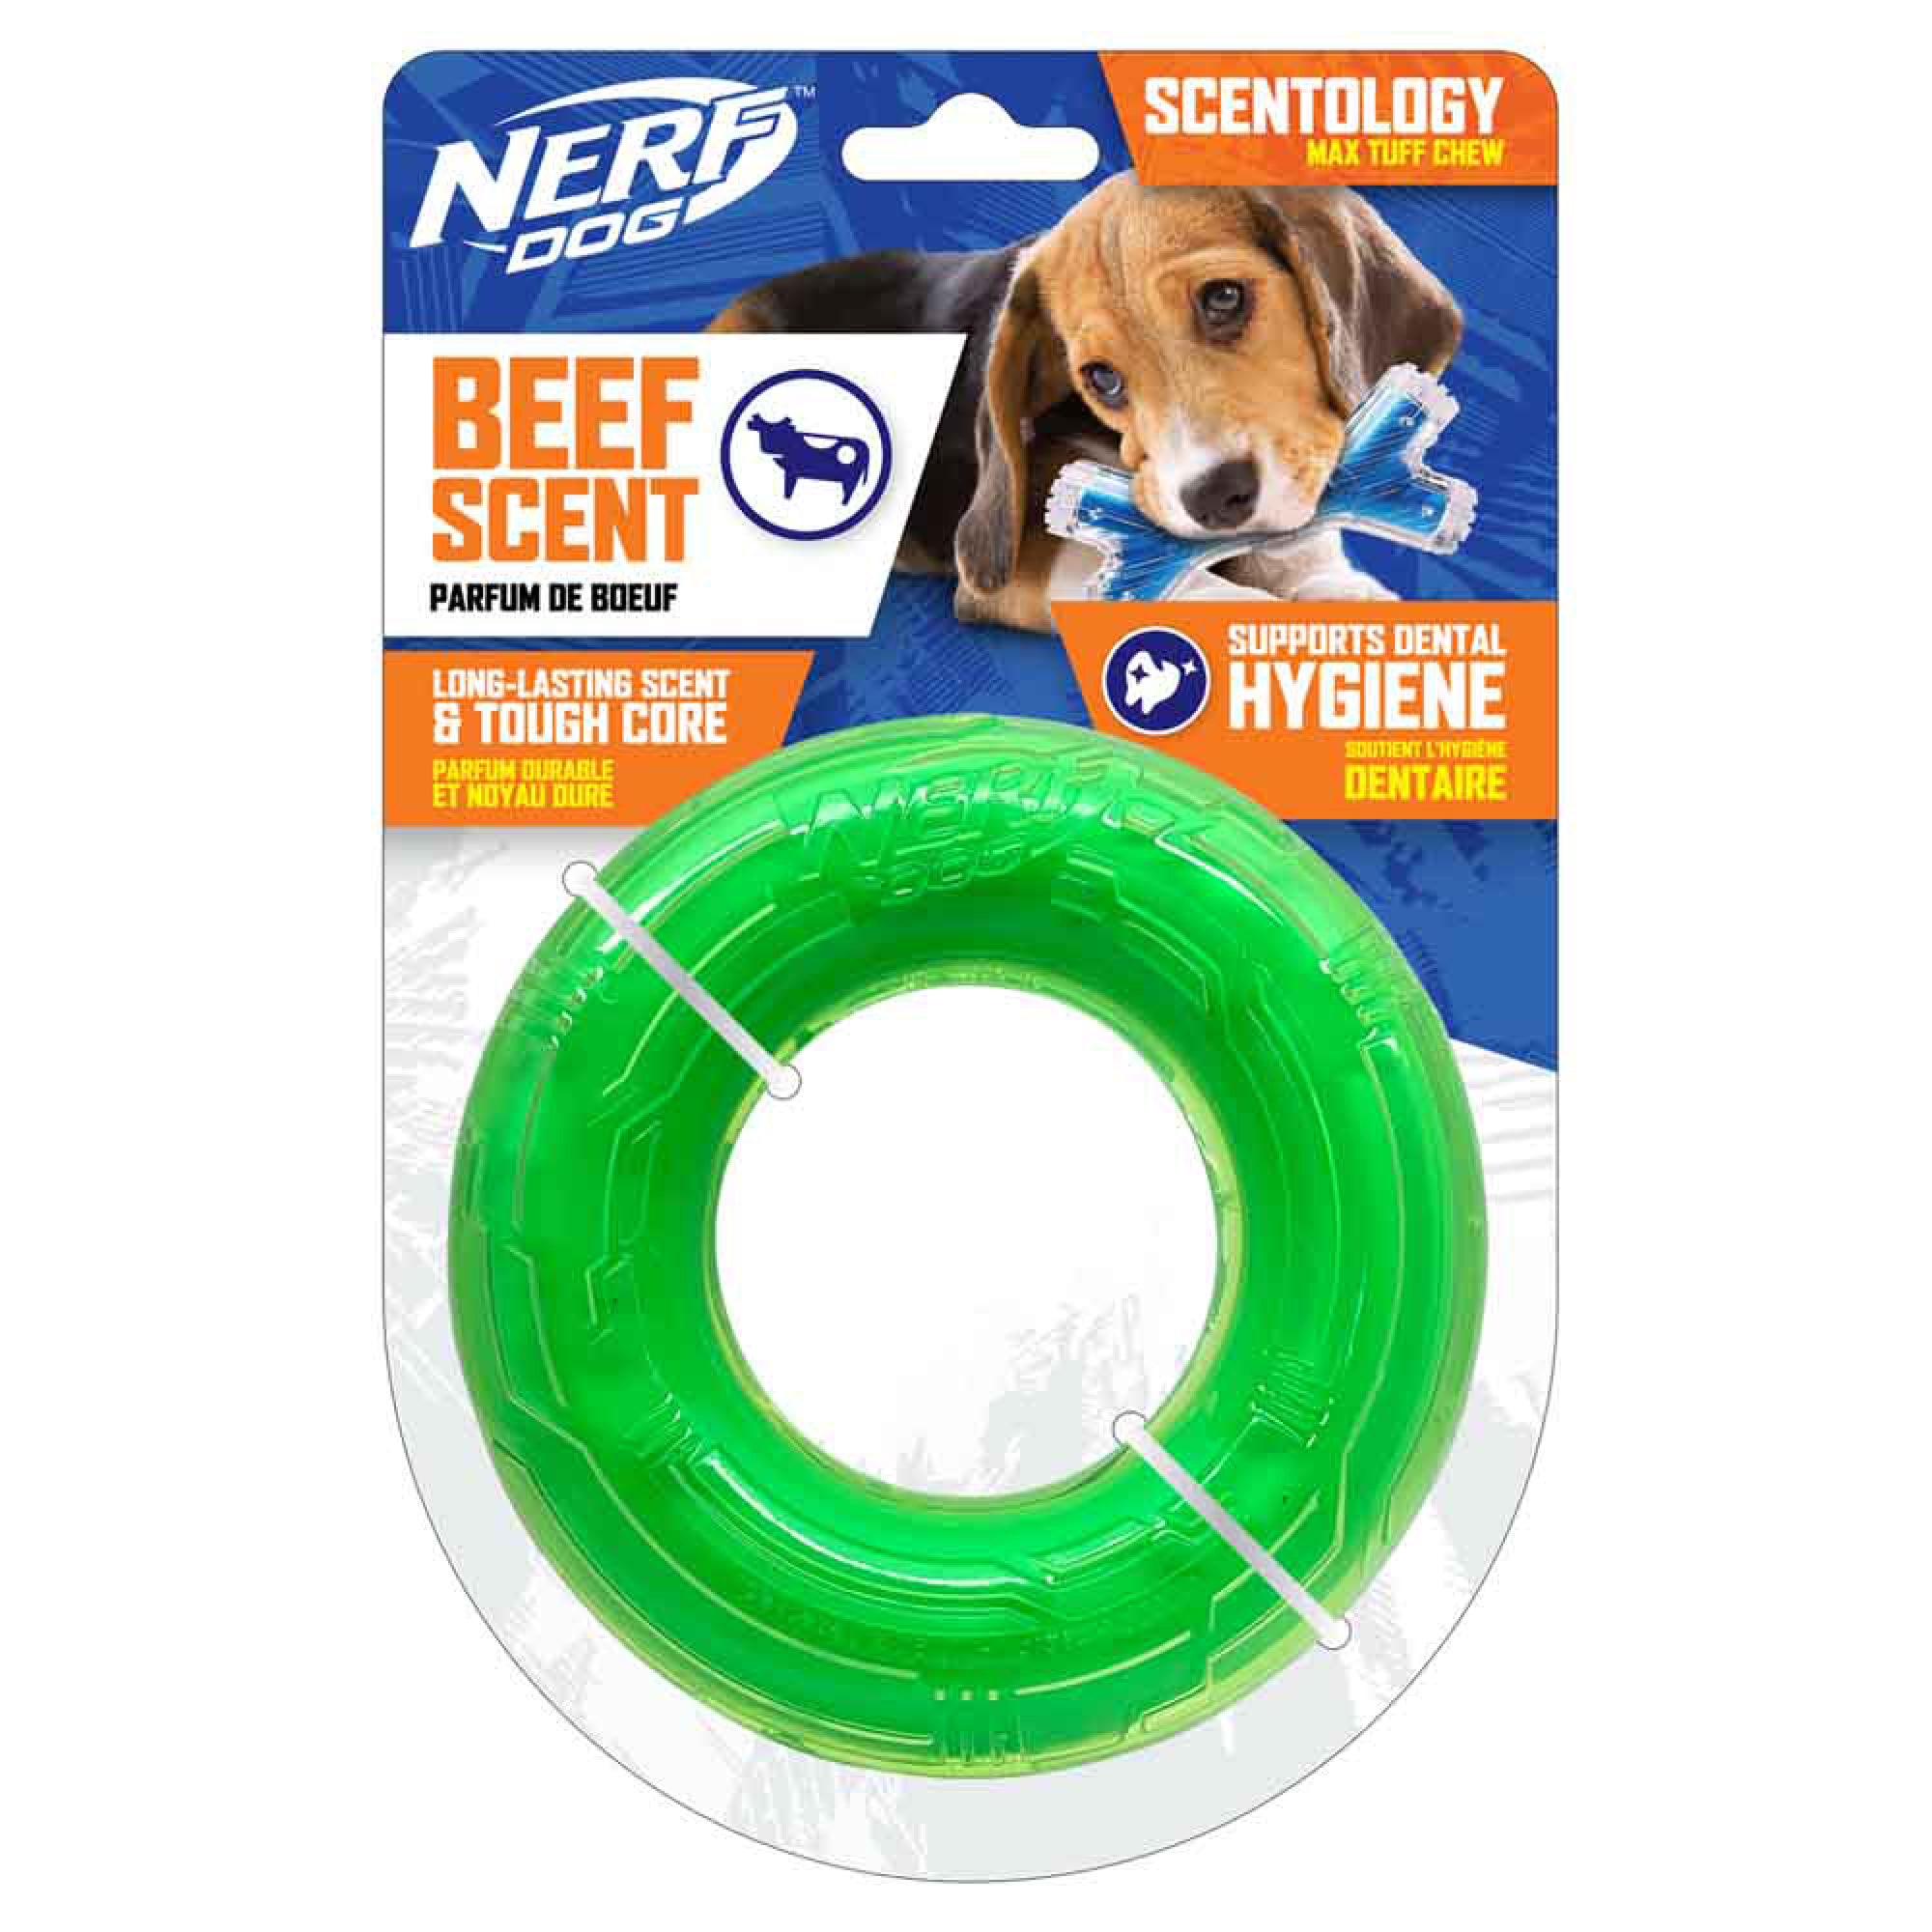 Nerf Dog Scentology Small Ring - Beef Scent - Green - Diam. 12.5 cm (5 in)